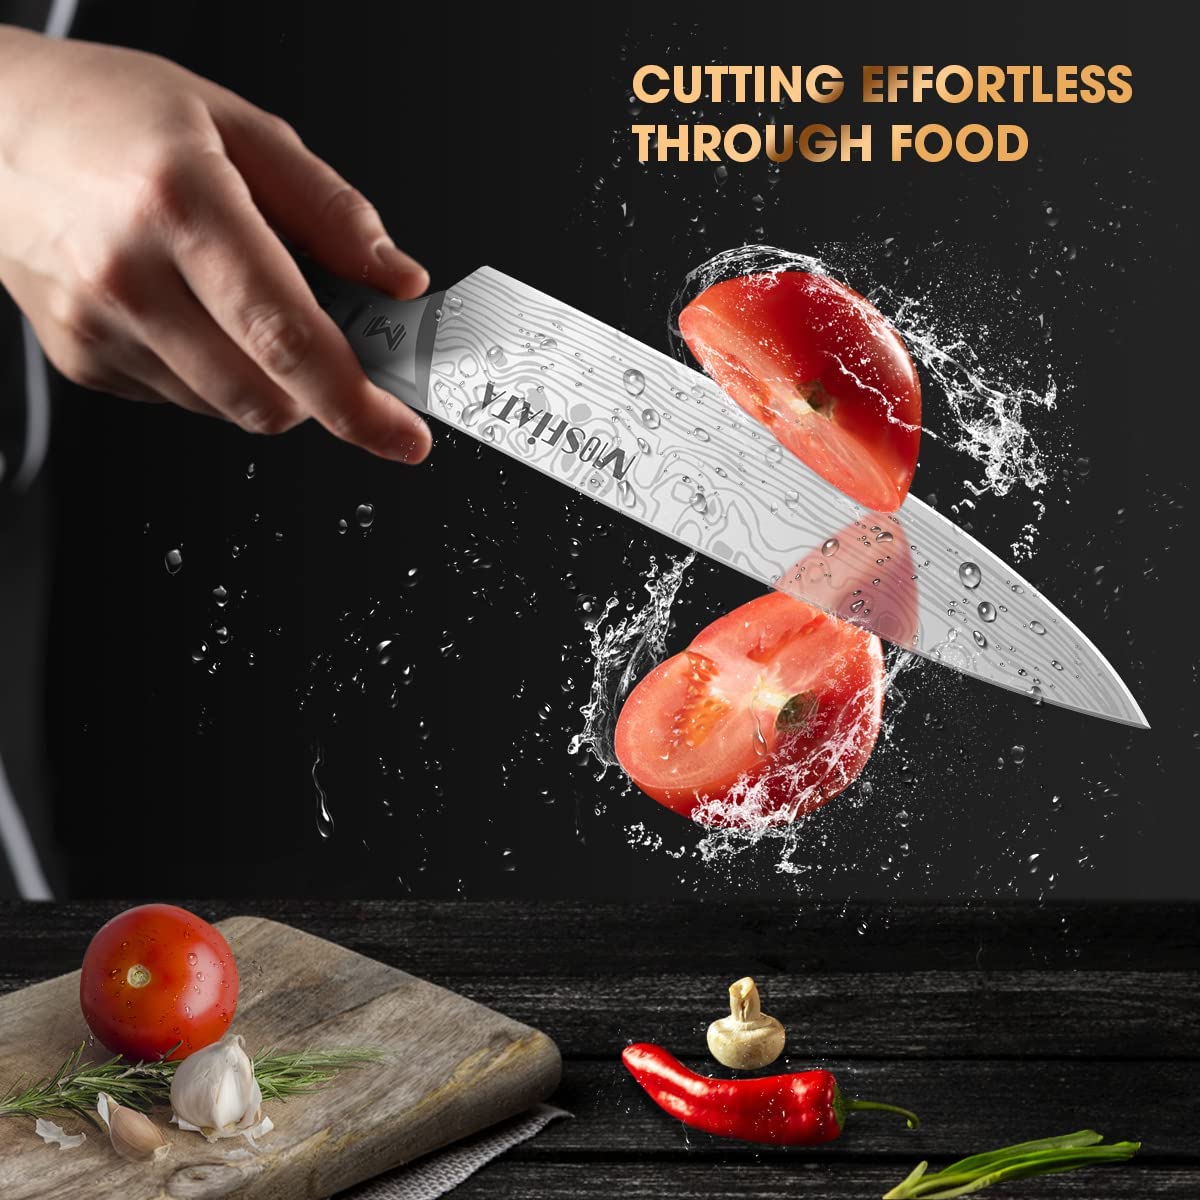 MOSFiATA 7 Piece Kitchen Knife Set, Ultra Sharp Knife Set with High Carbon Stainless Steel Handle, Knives Set for Kitchen, Chef Knife Set Come with Gift Box